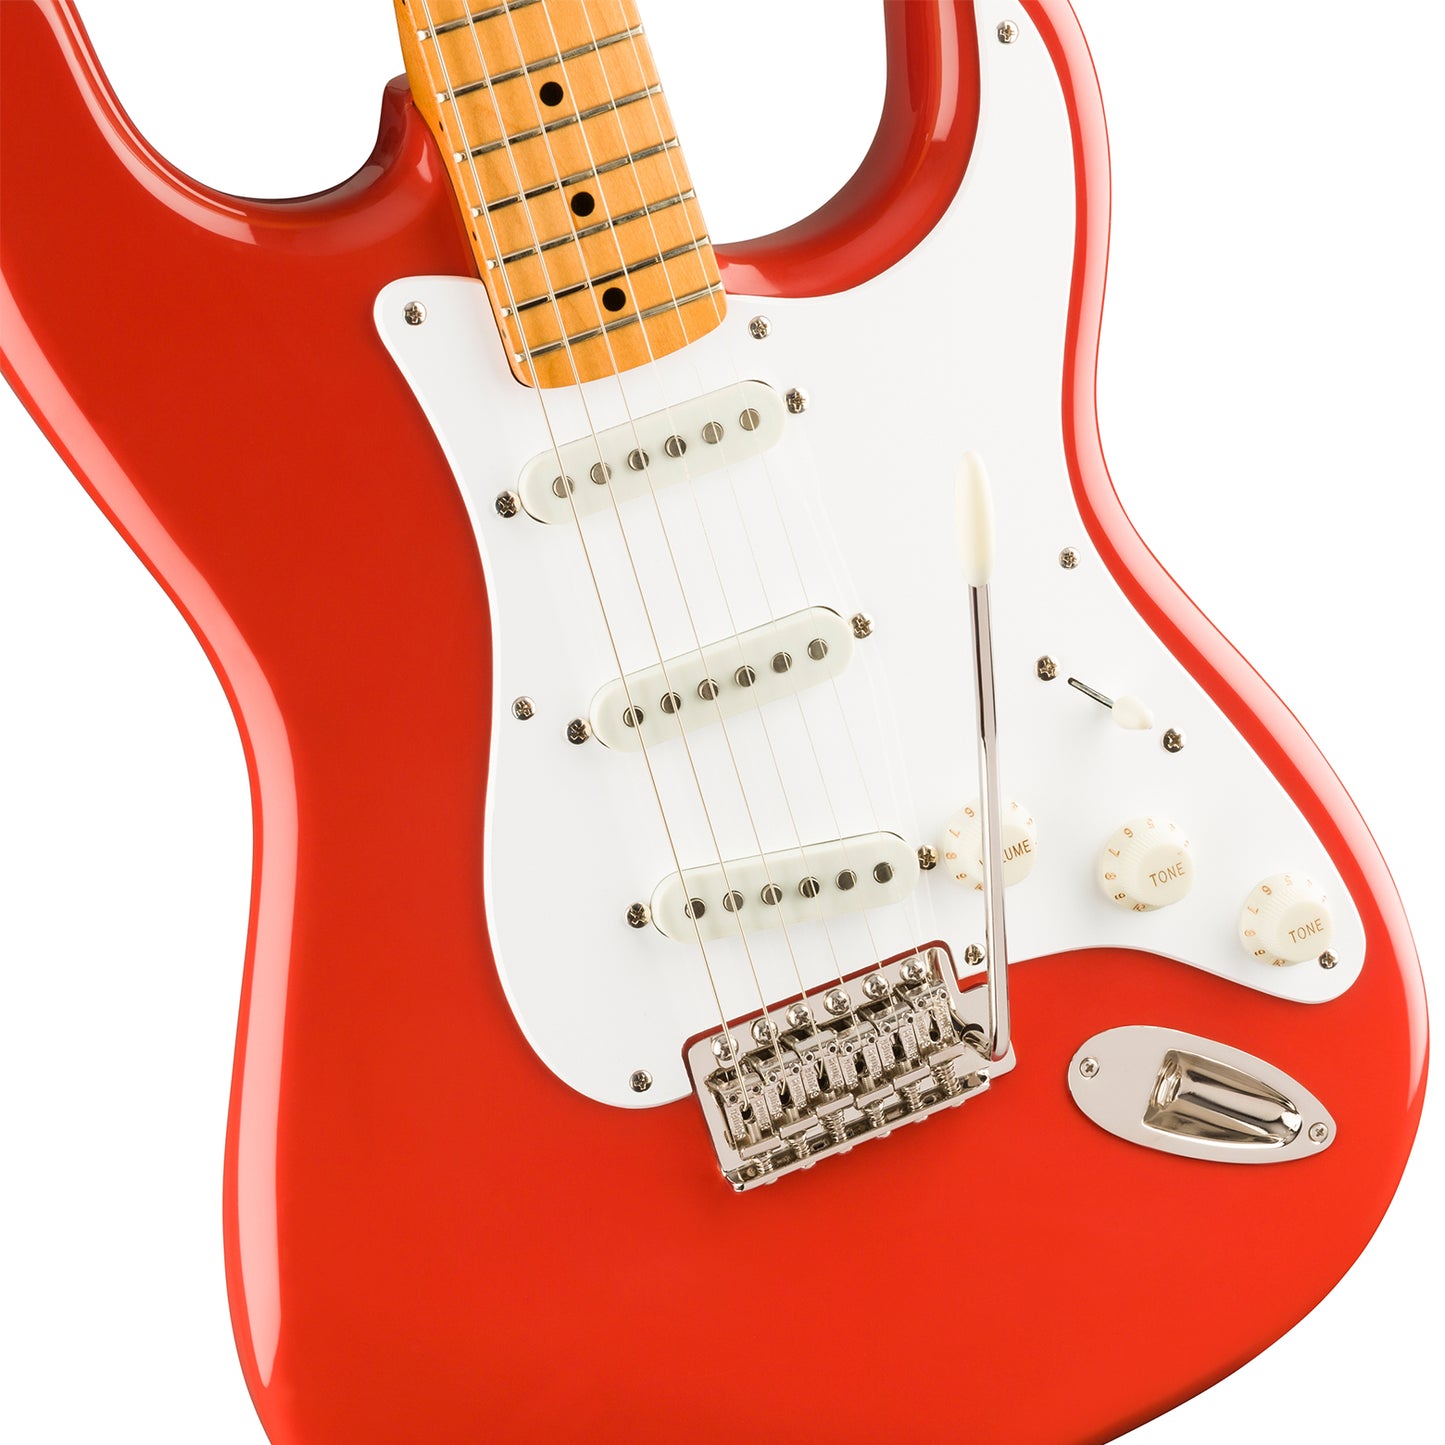 Squier by Fender Classic Vibe 50s Stratocaster Electric Guitar with SSS Pickup, Vintage Style Tremolo, Maple Fingerboard (Sunburst, White Blonde, Red)